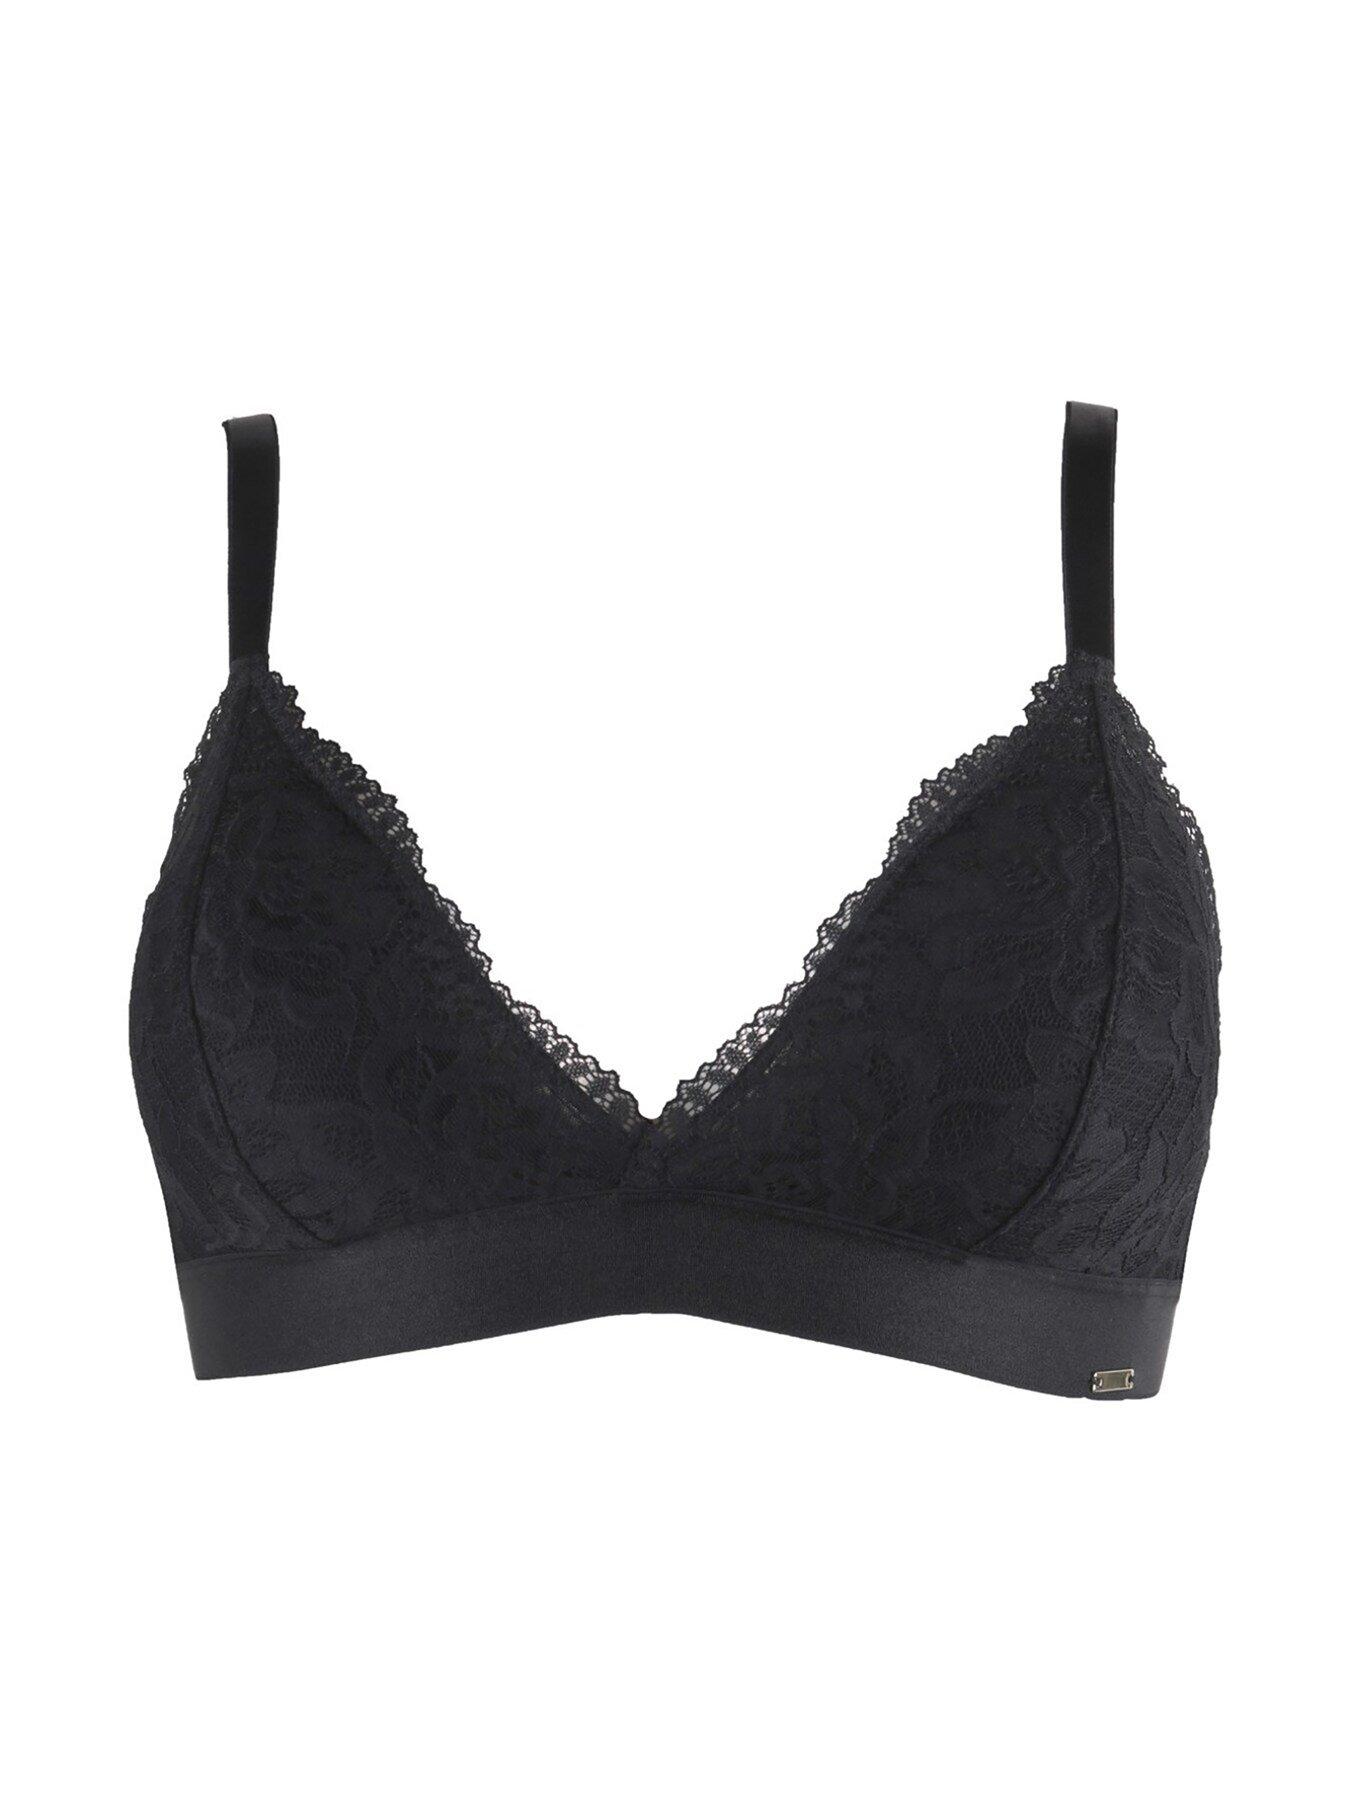 India Removable Padded Soft Triangle Bra - Black